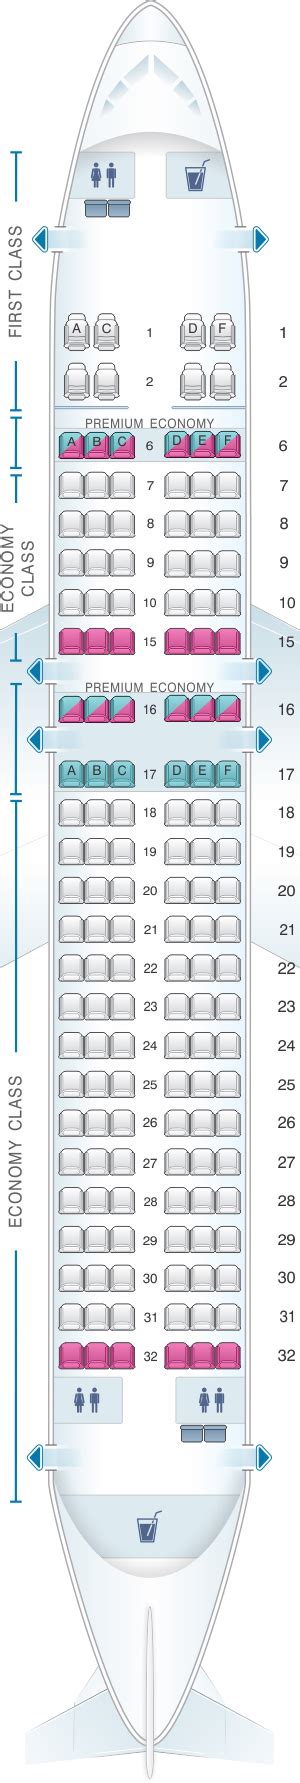 Alaska Airlines Seating Chart Airbus A320 Two Birds Home